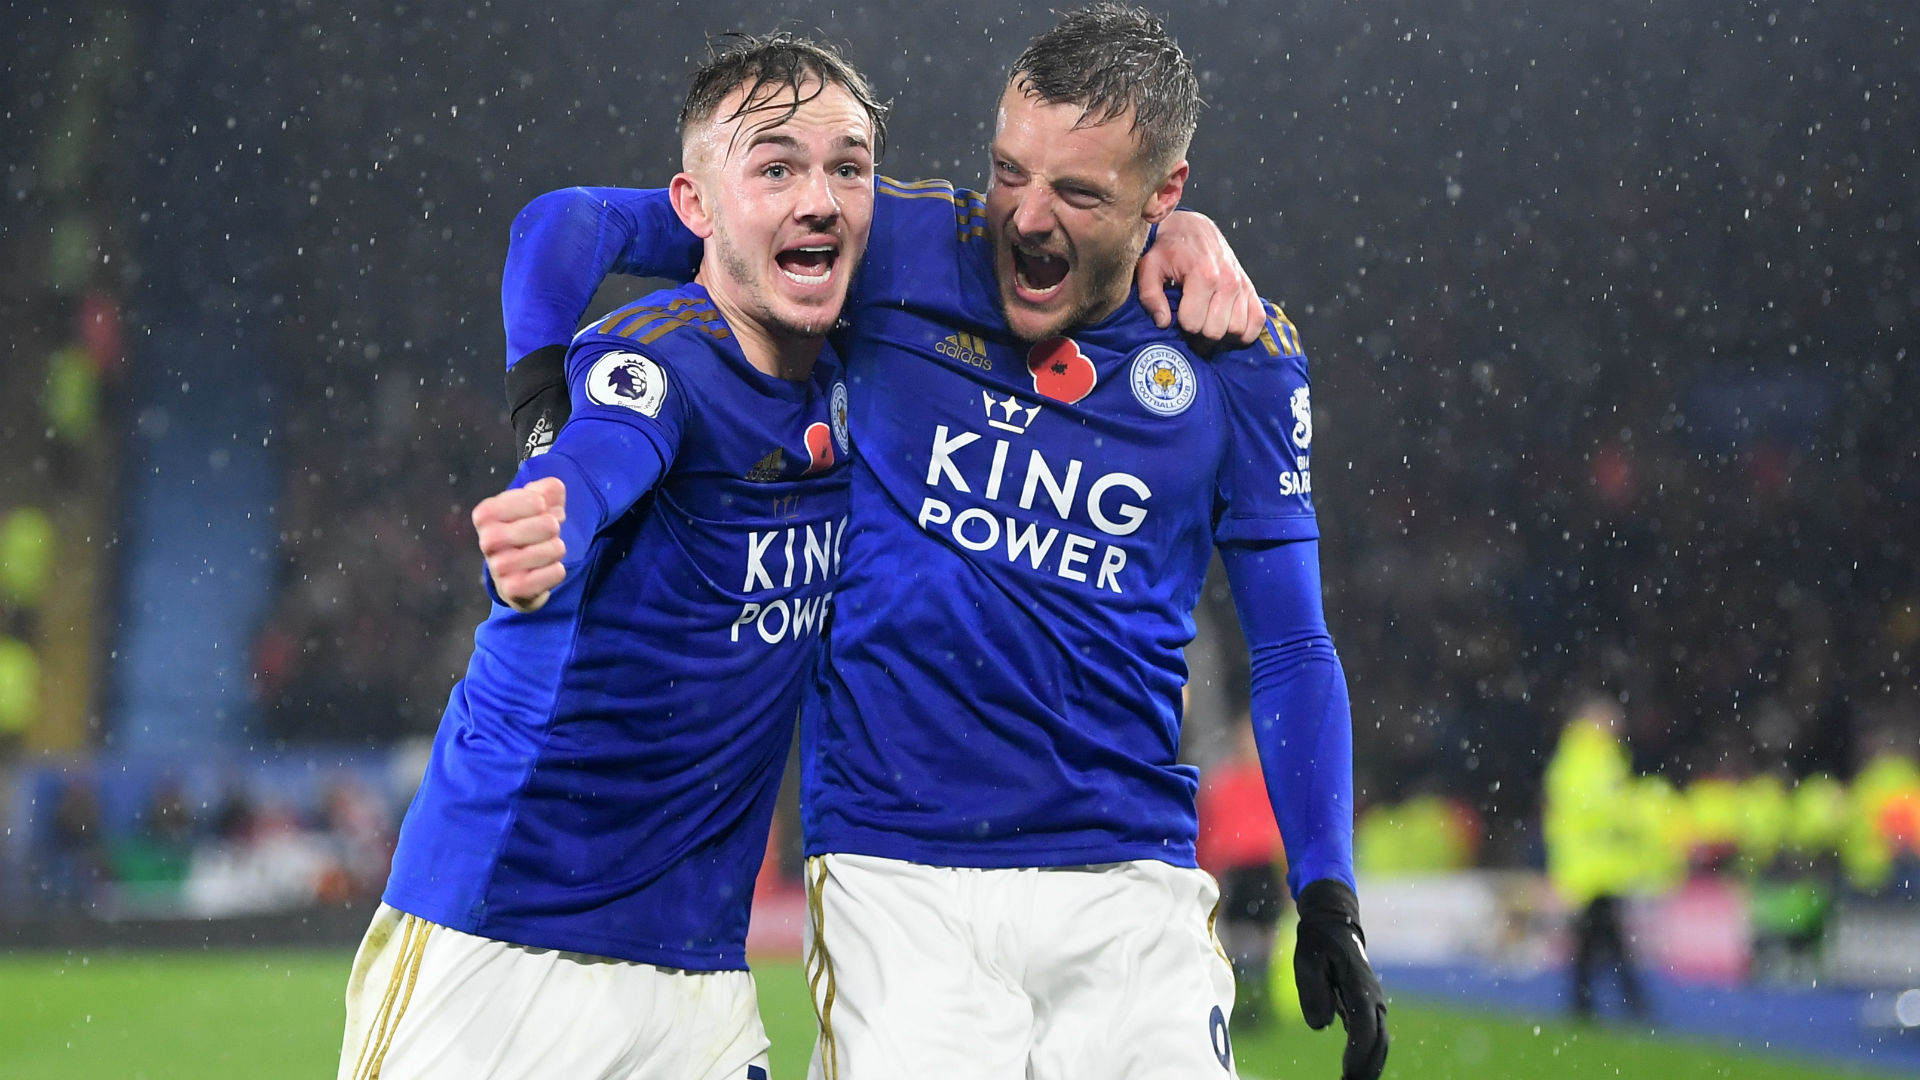 Arsenal's misery deepened with a 2-0 defeat at Leicester City, as the Foxes showed they're the team the Gunners feel they should be.